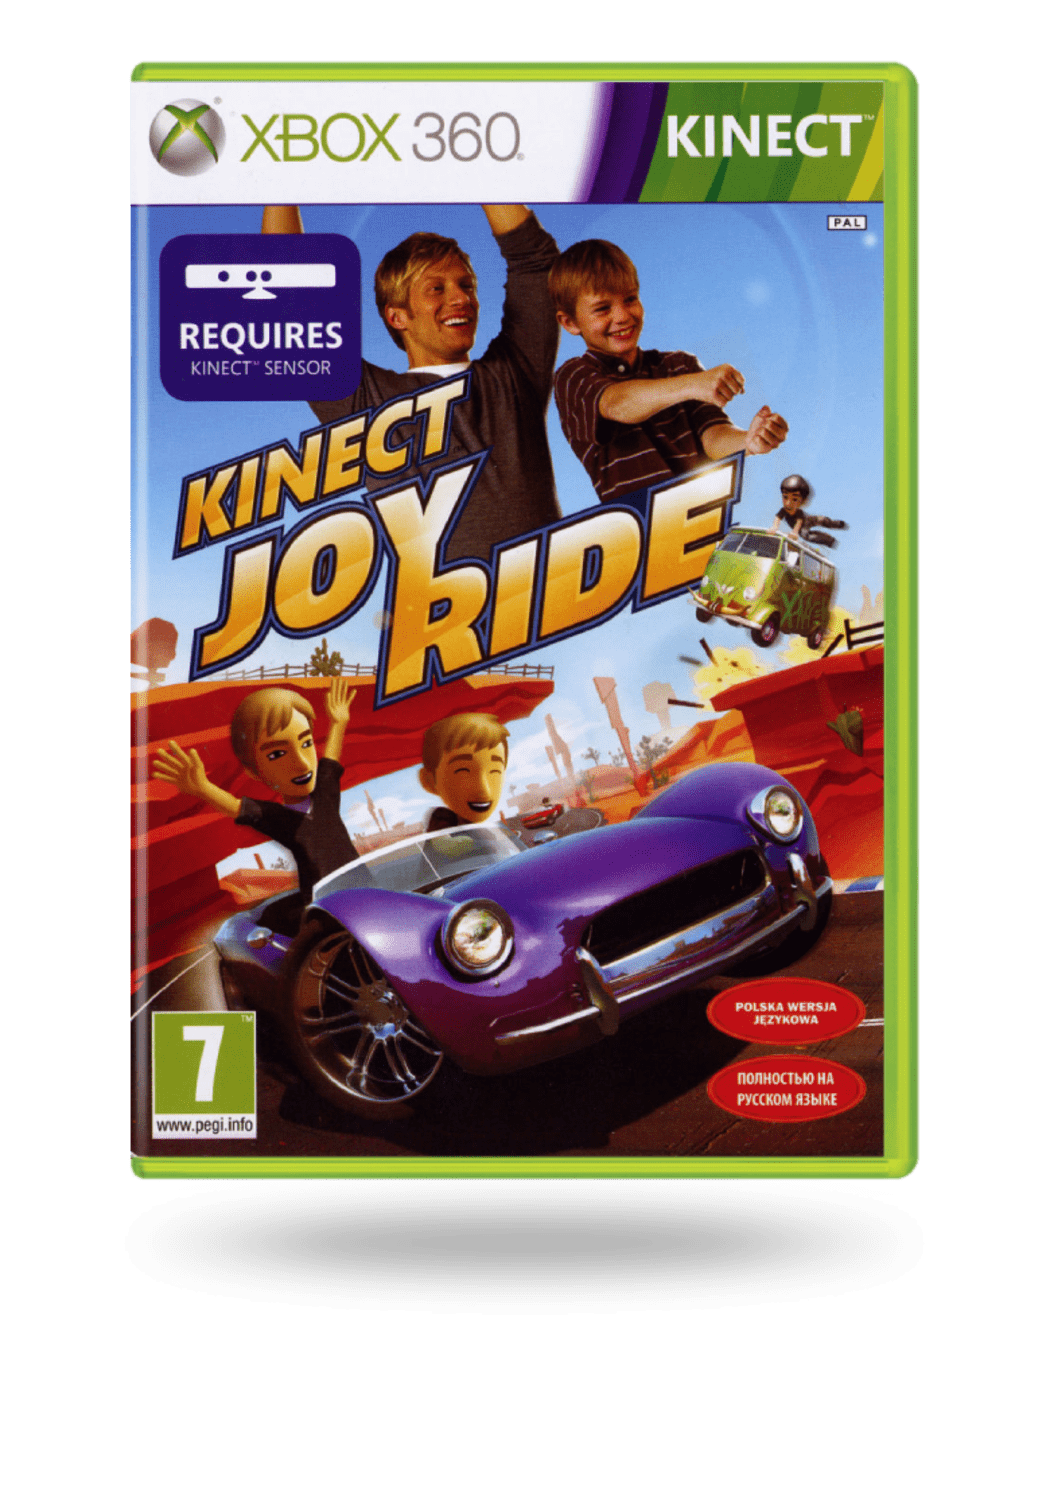 Microsoft Kinect Joy Ride Racing Game - Complete Product